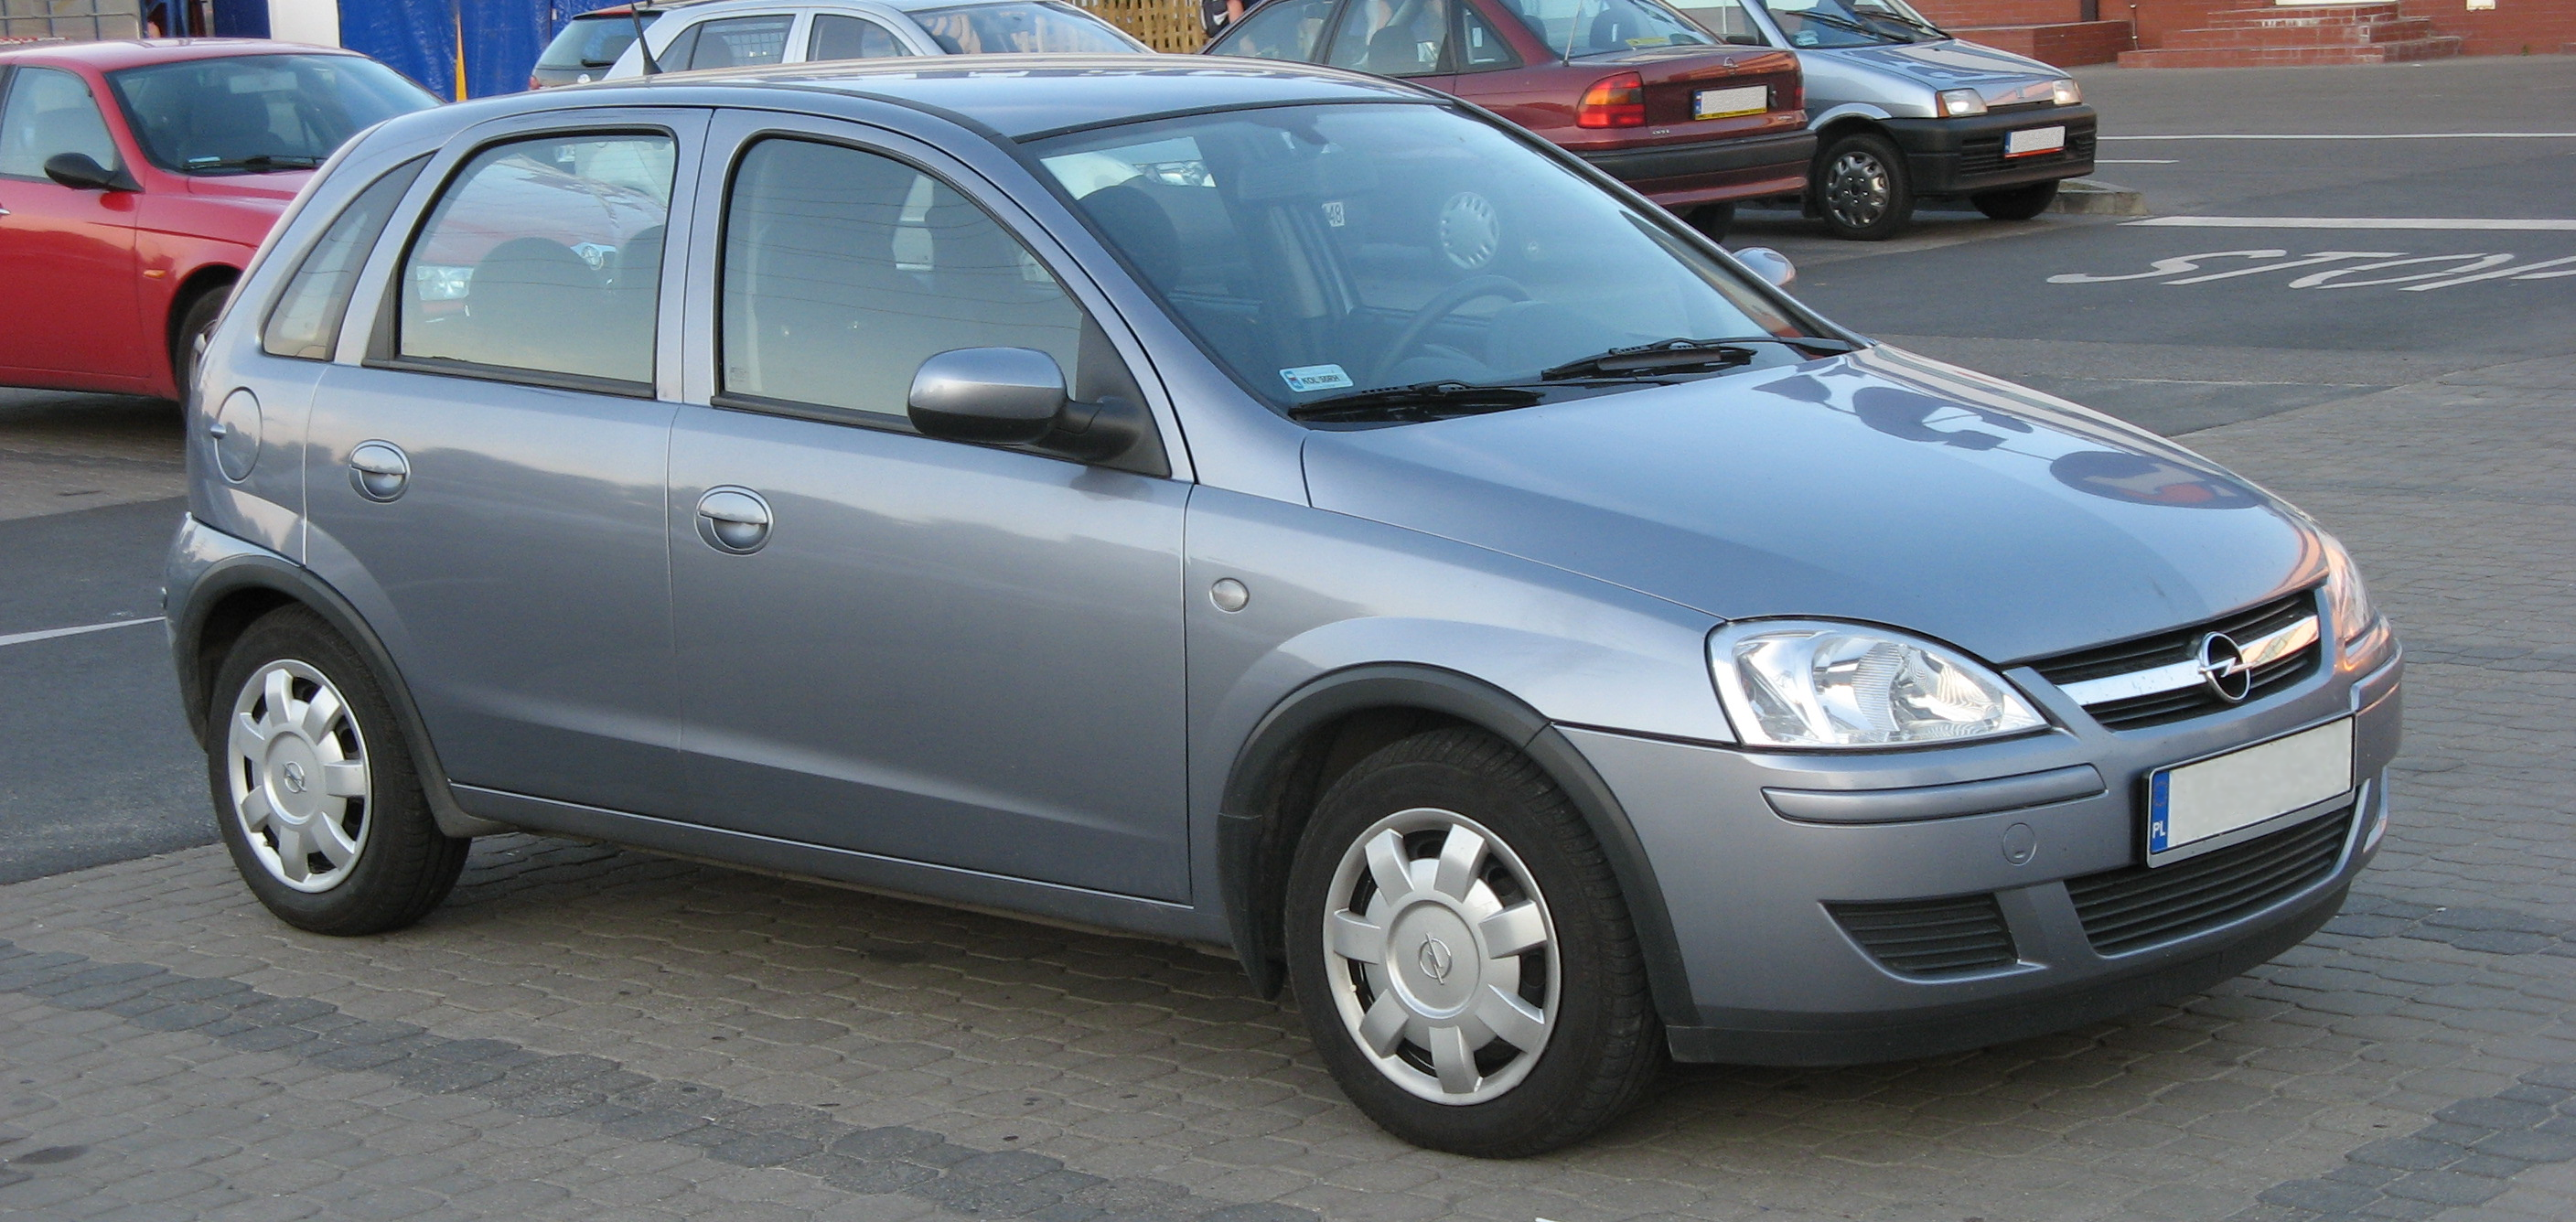 Dossier: Opel Corsa C 5 portes.png - Wikimedia Commons